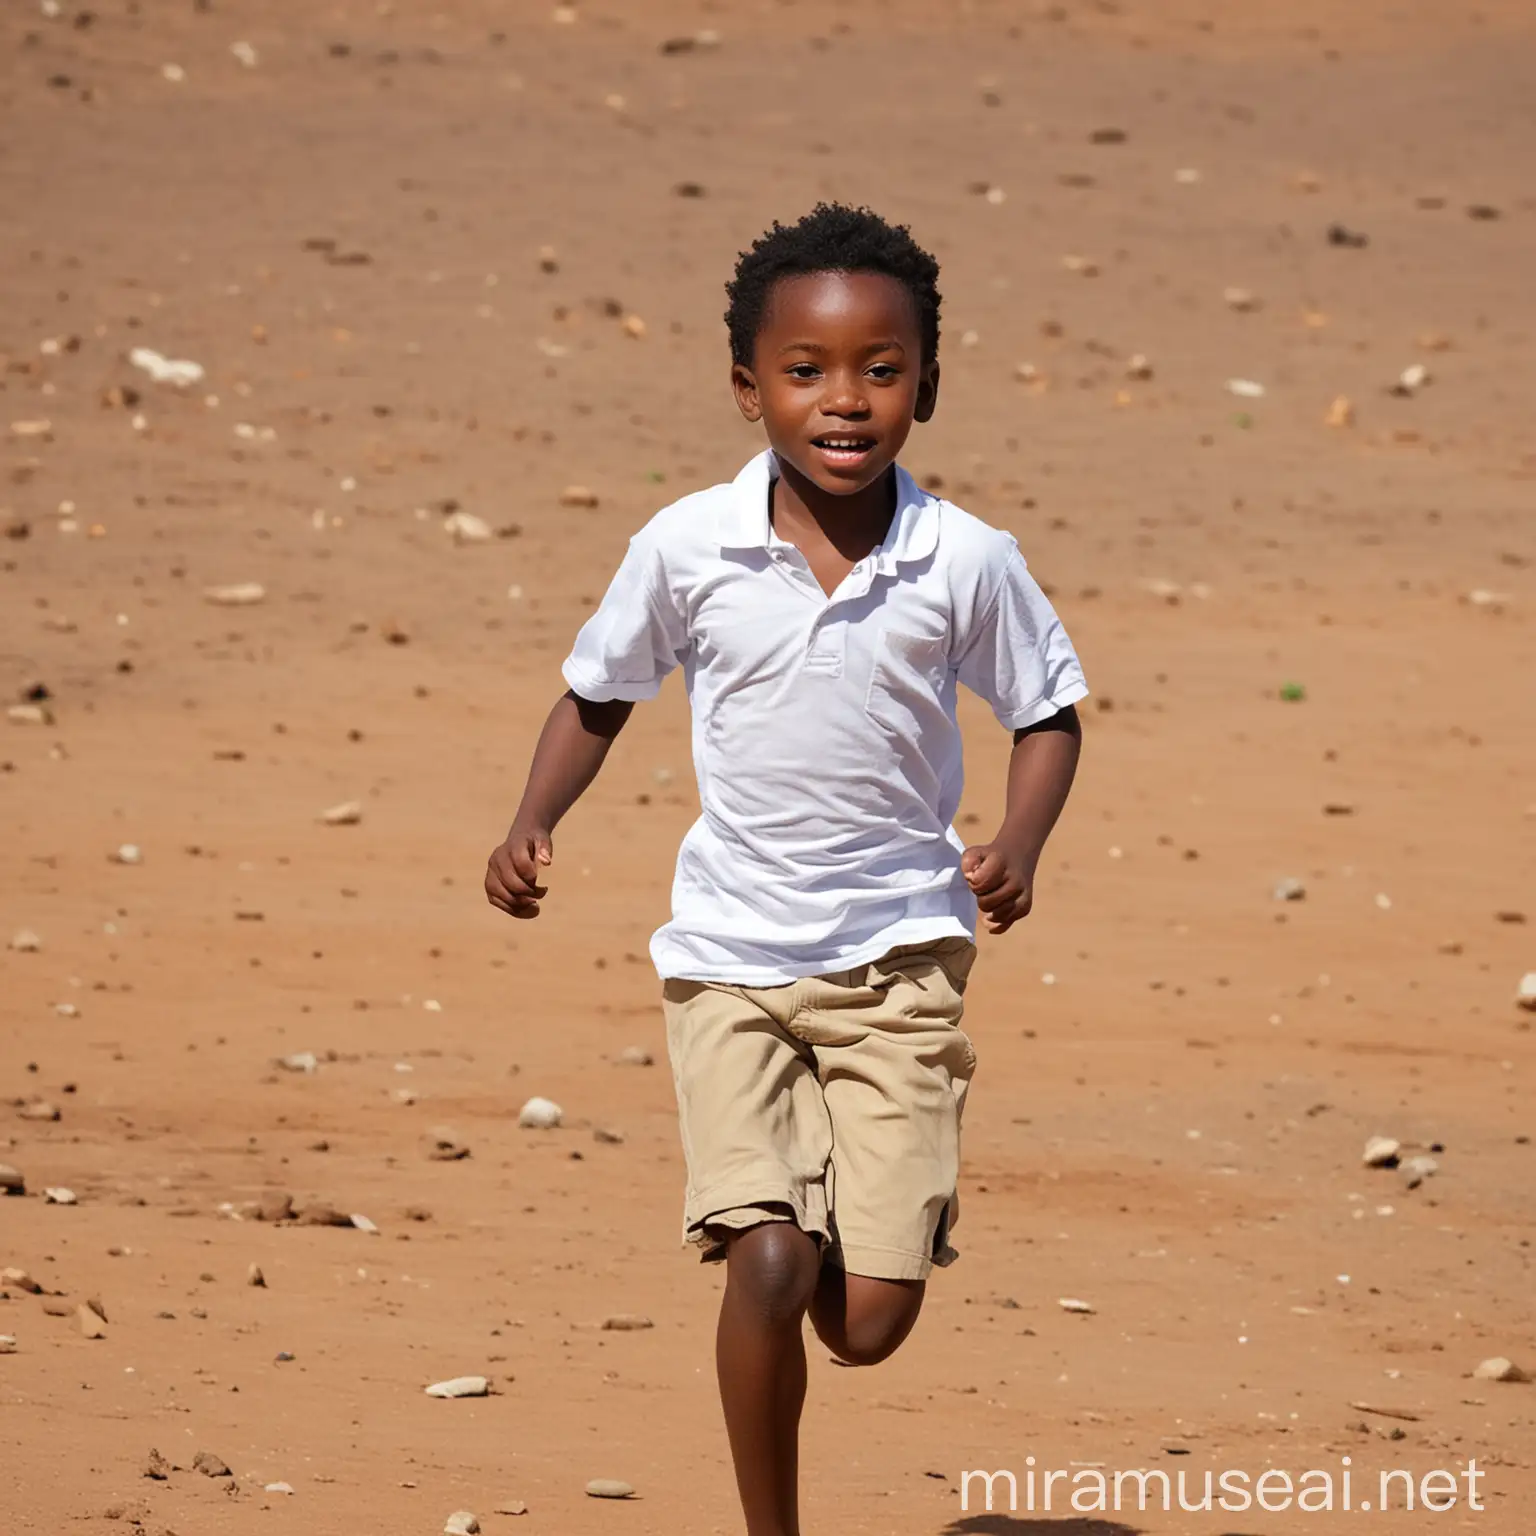 Energetic African School Child Running in a Playground